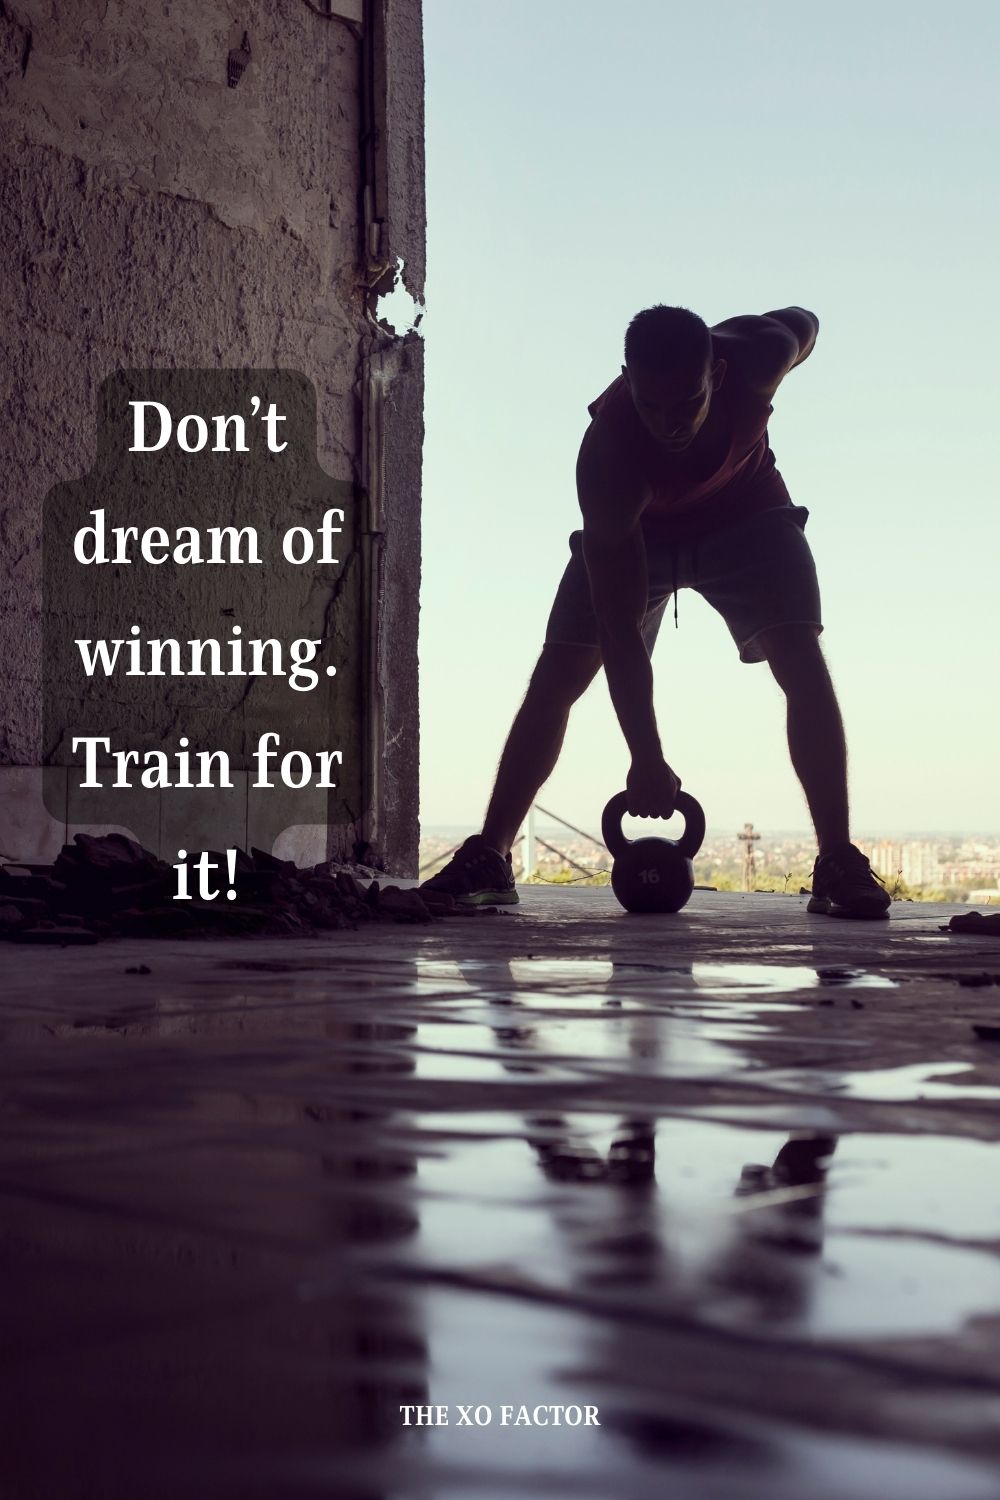 Don’t dream of winning. Train for it!